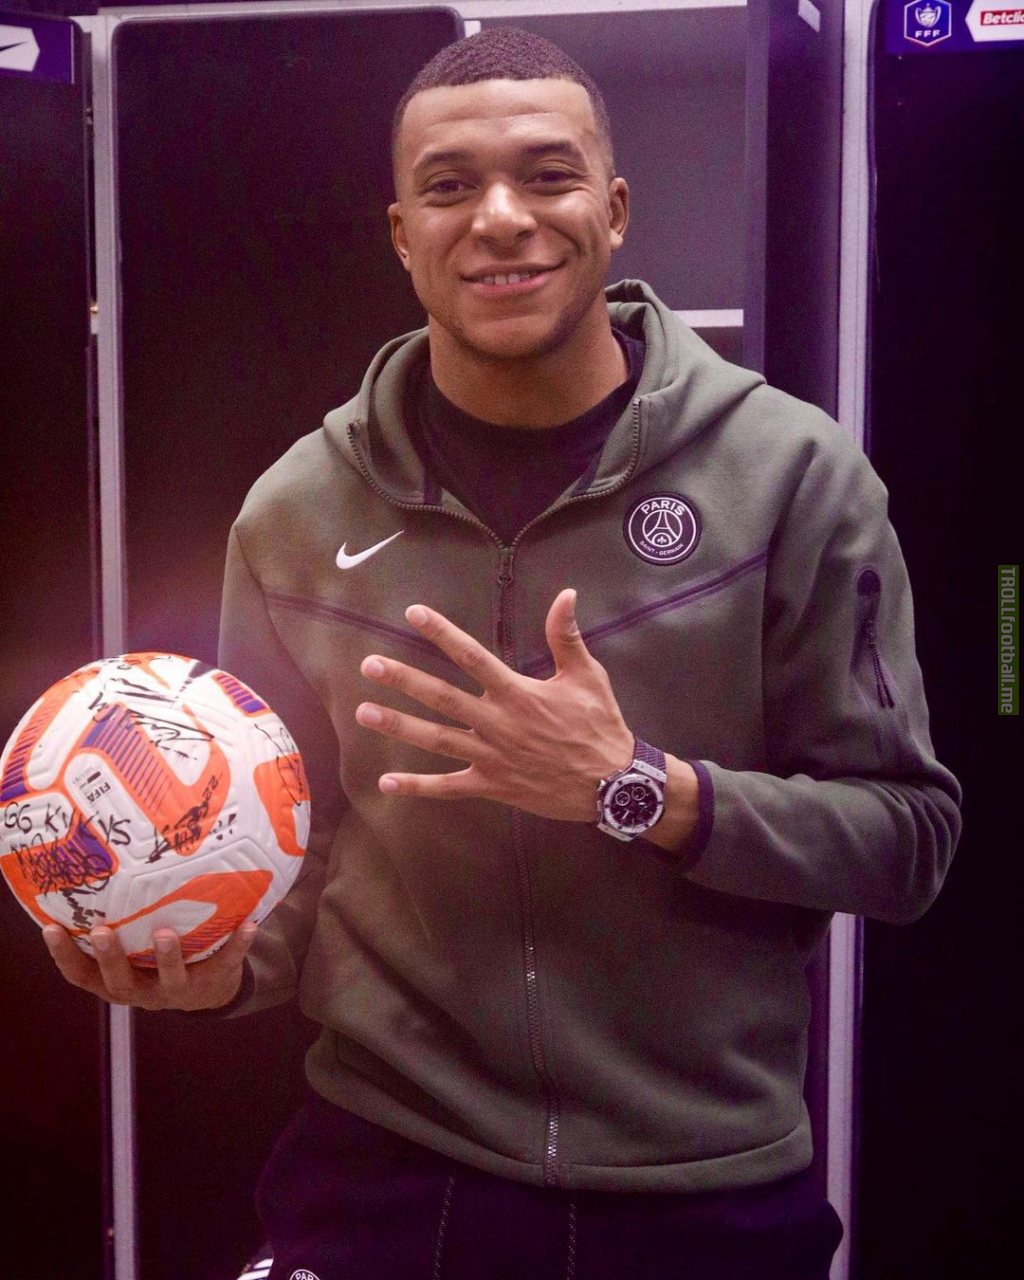 Mbappé scored 5 Goals out of 7 for PSG today.